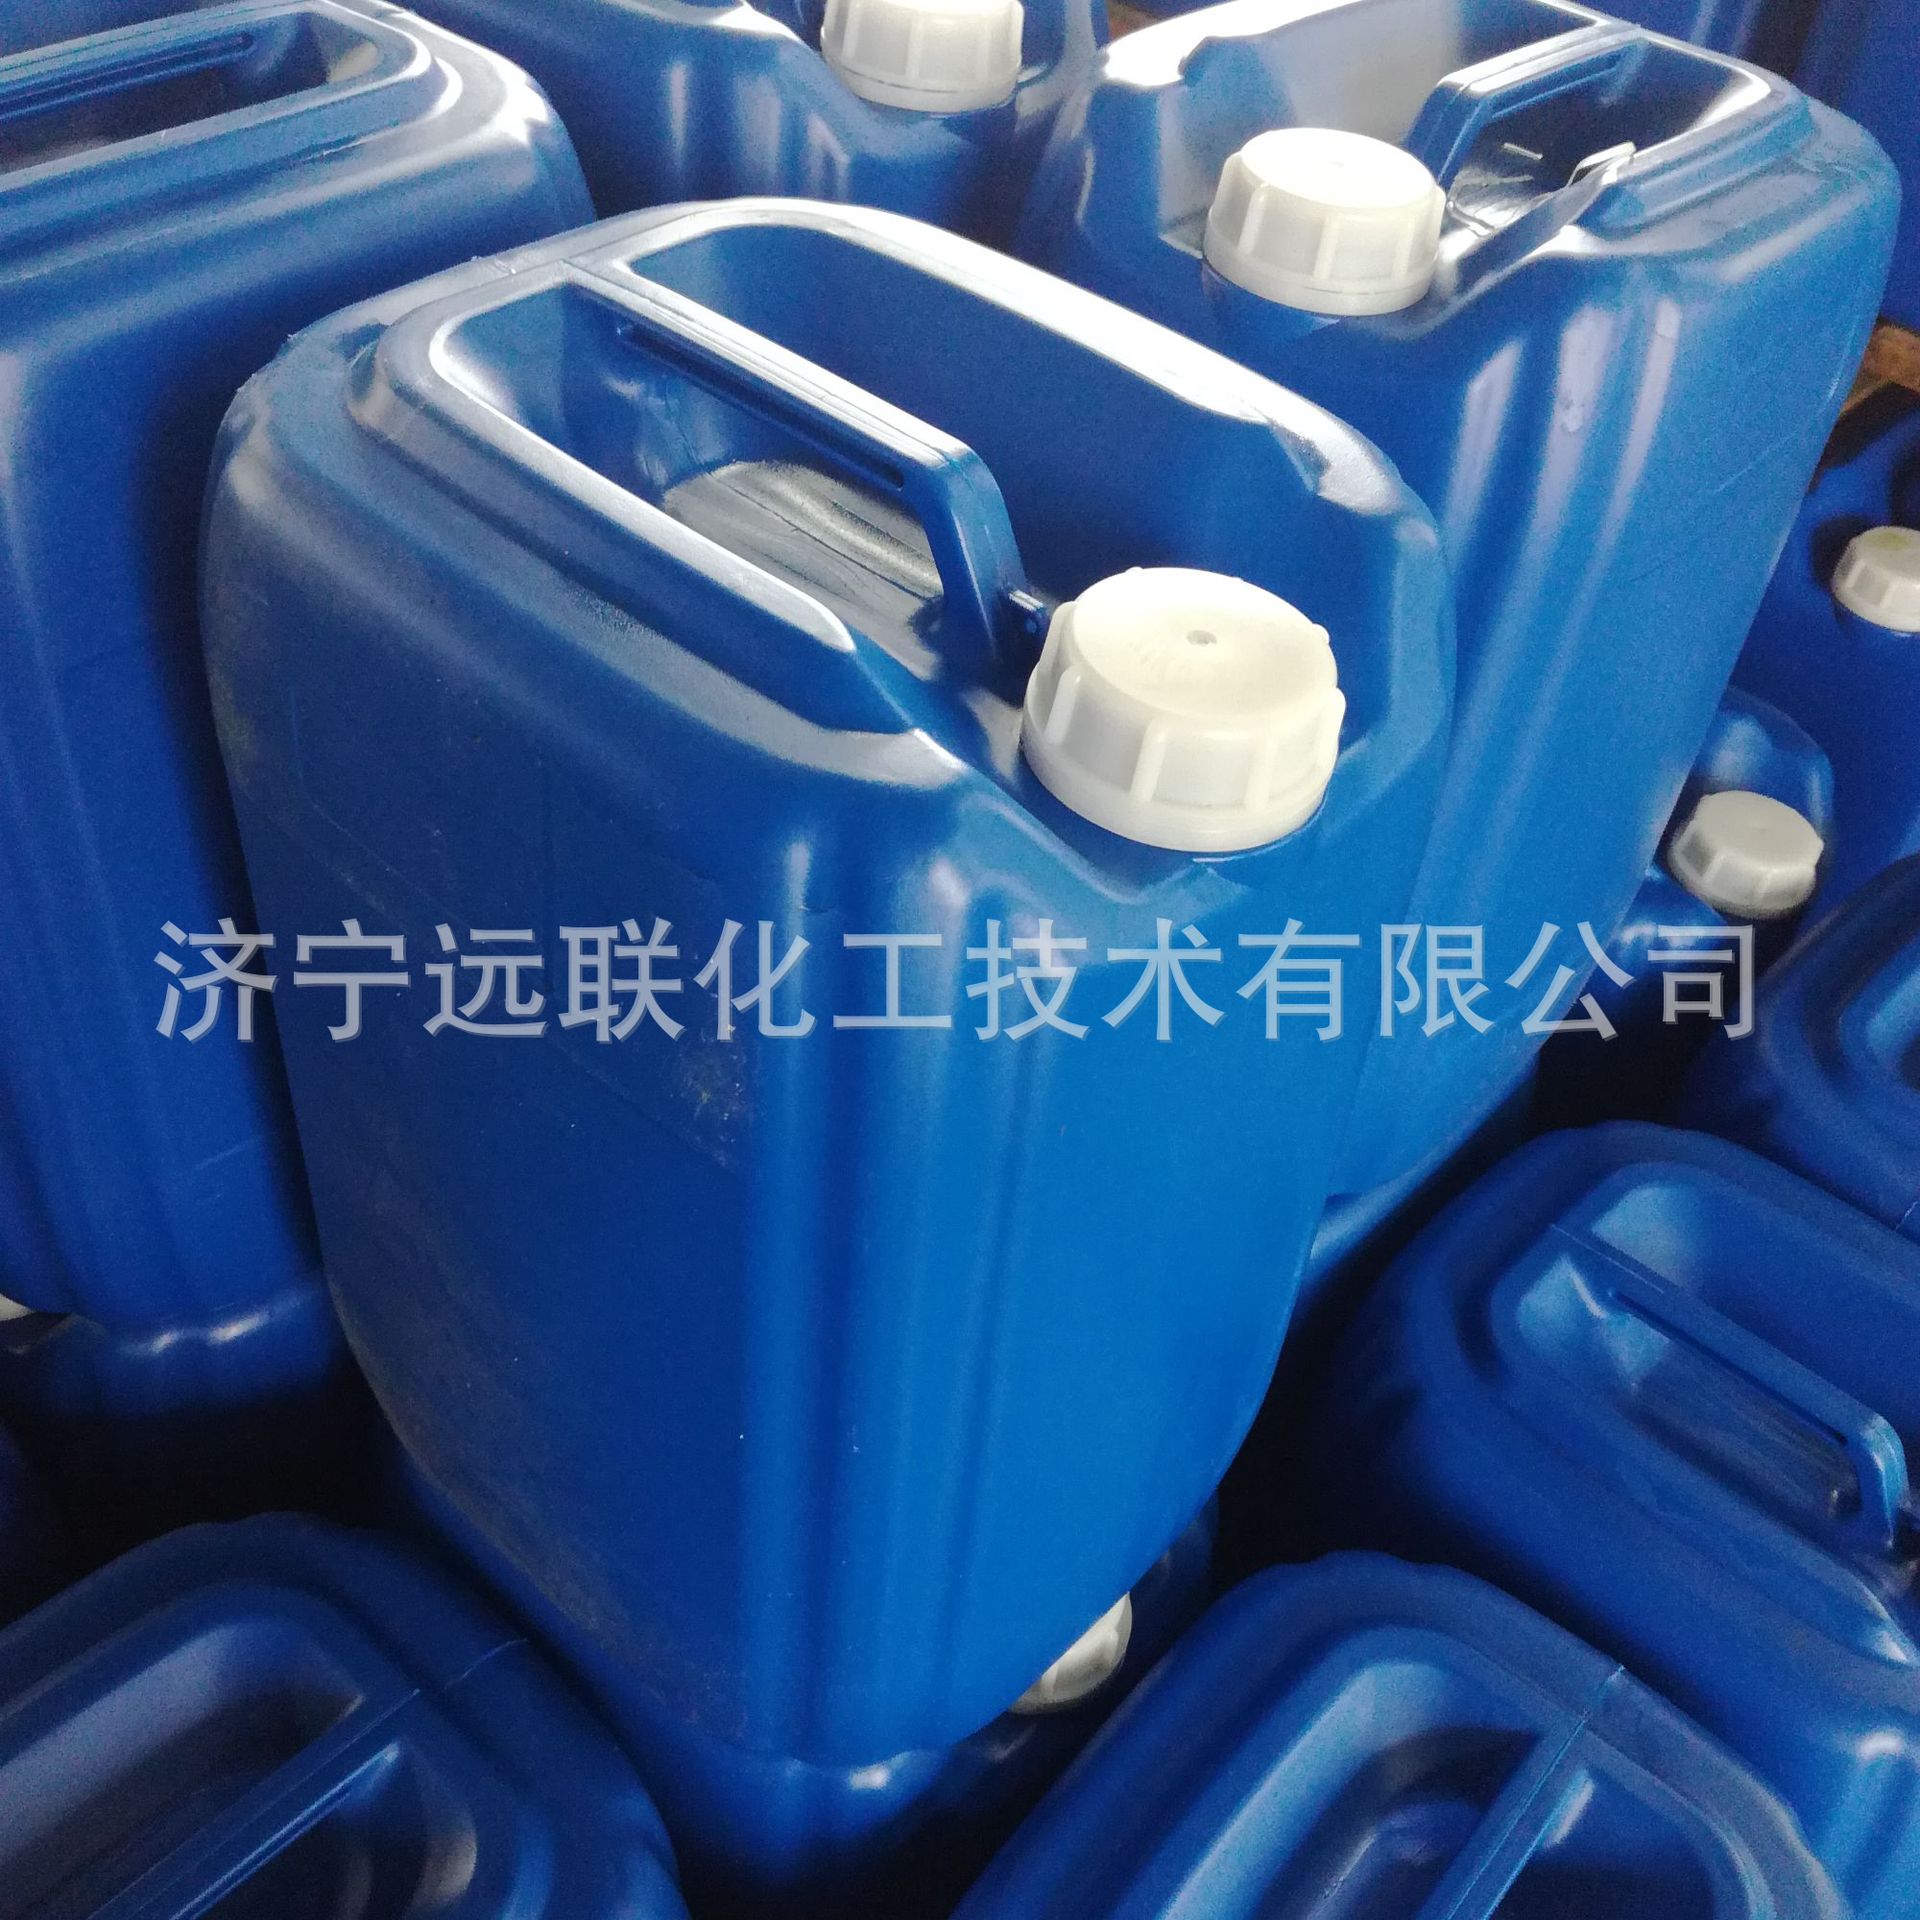 peroxide Bleach Stabilizer Cloth washing Phosphorus free cleaning aid Chelating agent Manufactor Price IDS